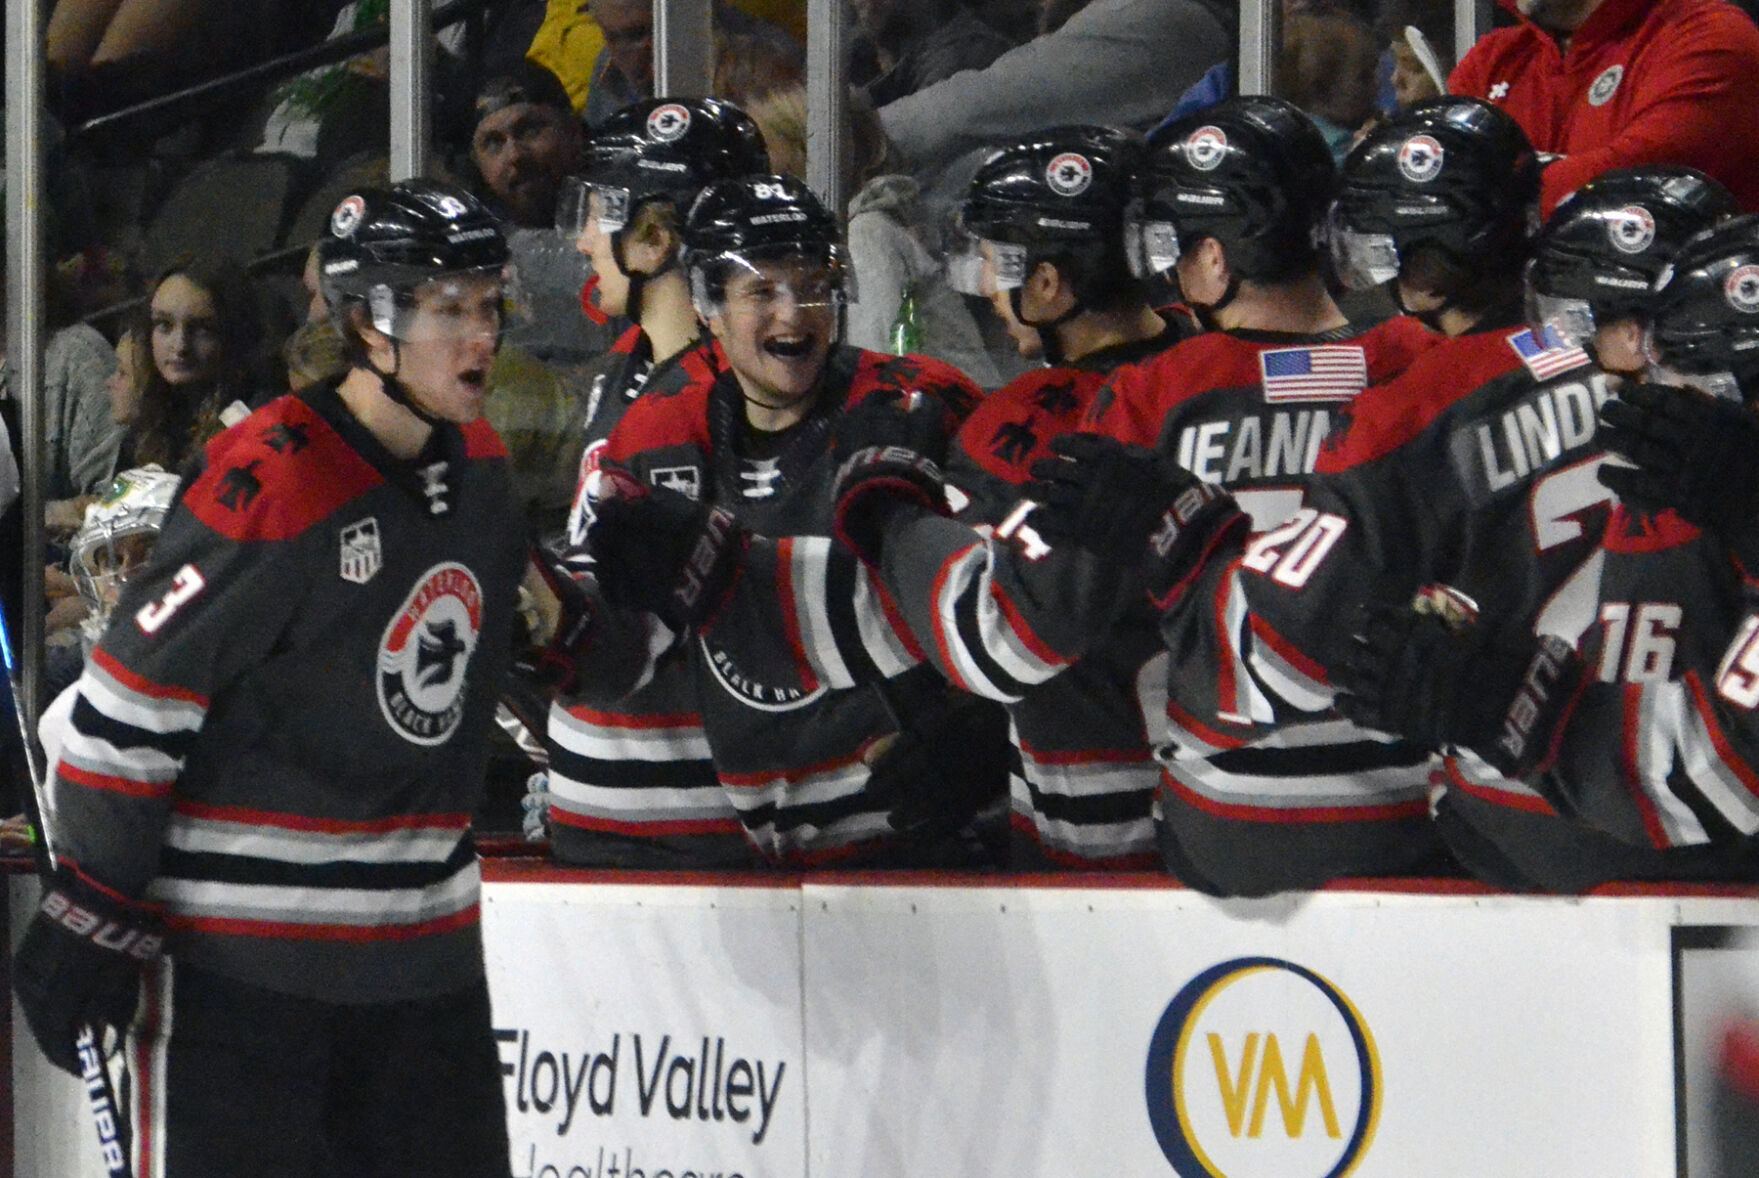 Black Hawks beat Musketeers 2-1, force Game 3 Tuesday in Sioux City